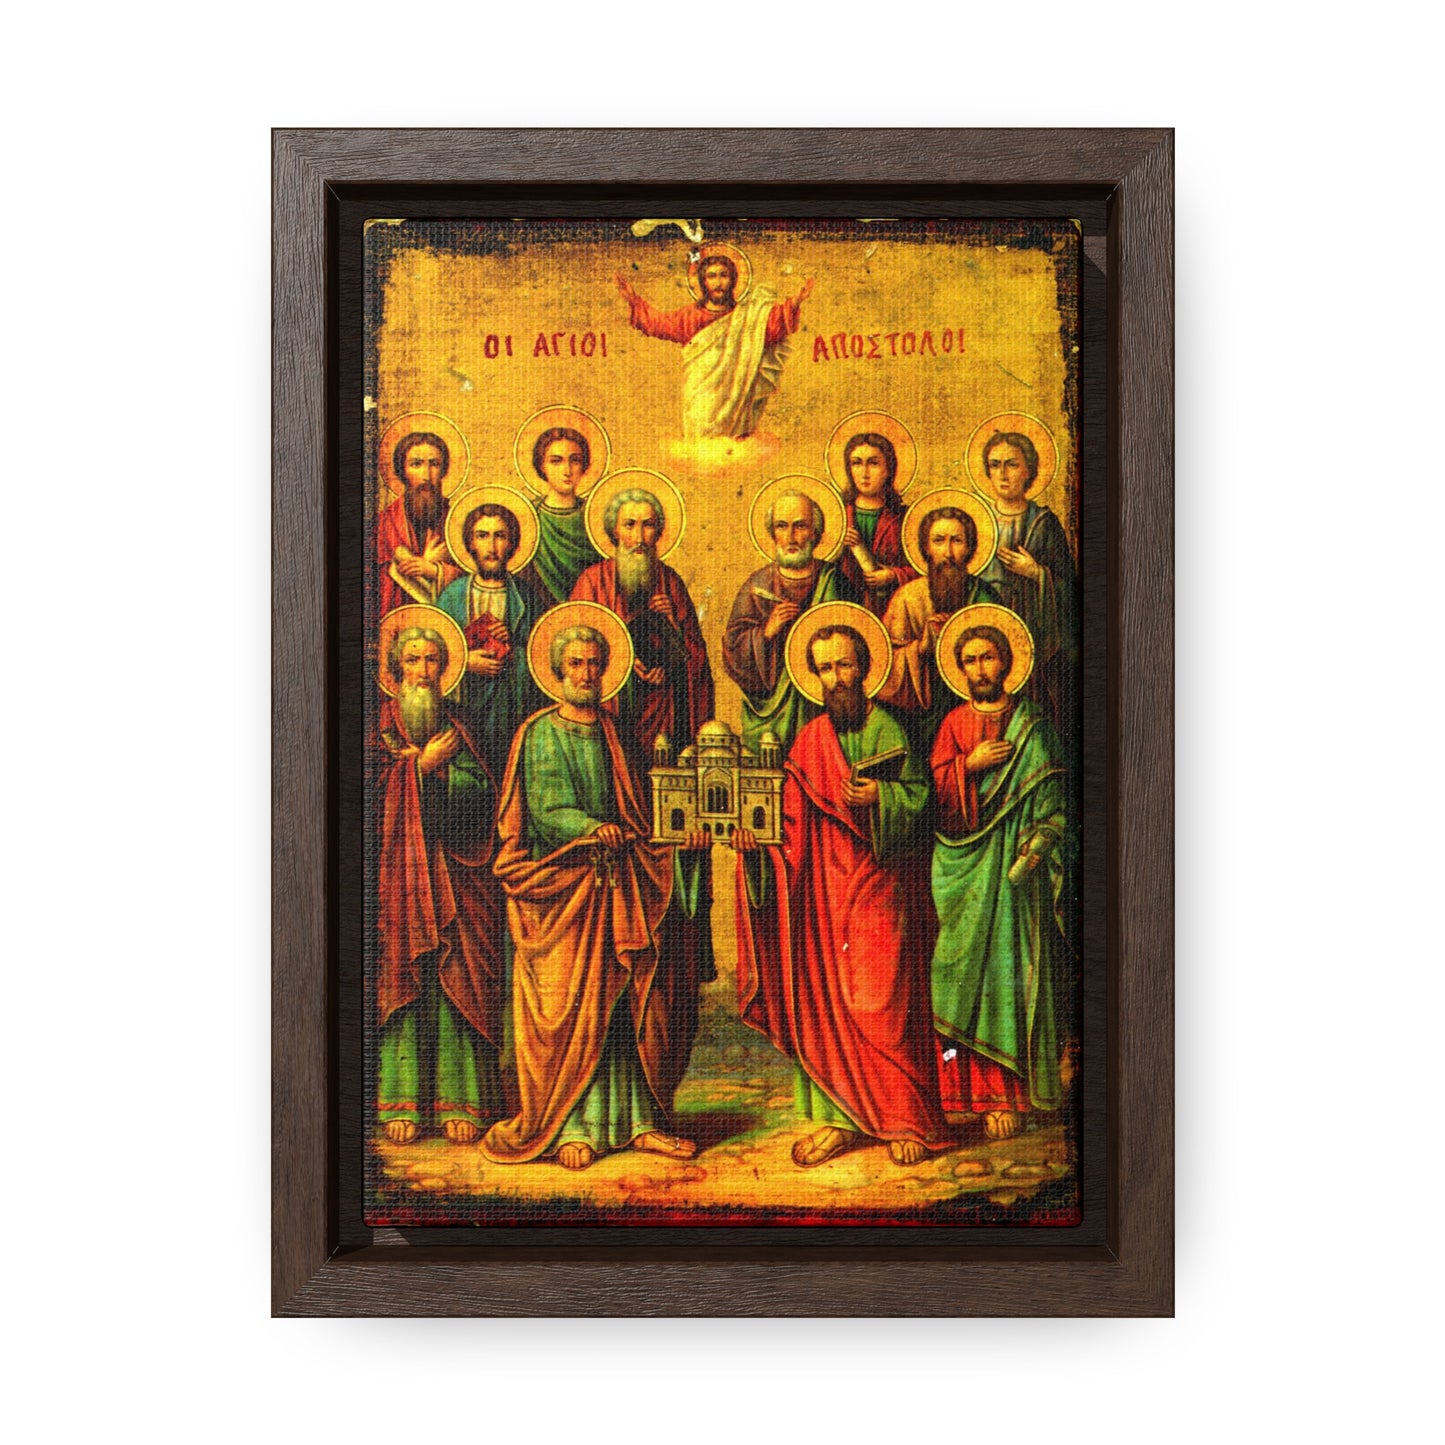 Synaxis of the Apostles Greek Icon Framed Gallery Canvas Wrap 5"x7" - Studio Lams Creative Collective